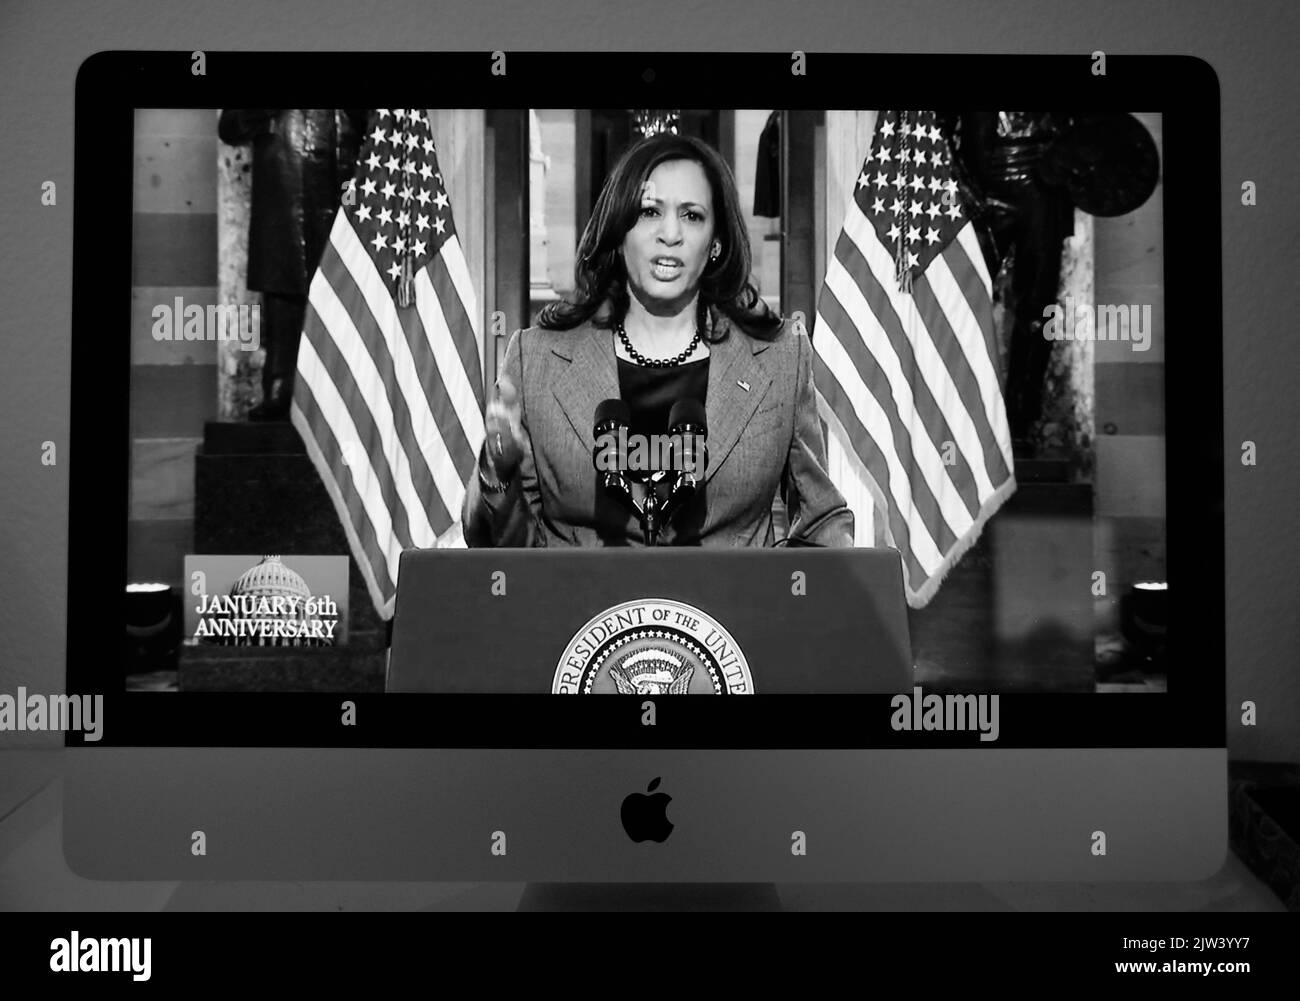 A C-SPAN television screen shot of U.S. Vice President Kamala Harris speaking on the annivarsay of the January 6 attack on the U.S. Capitol. Stock Photo